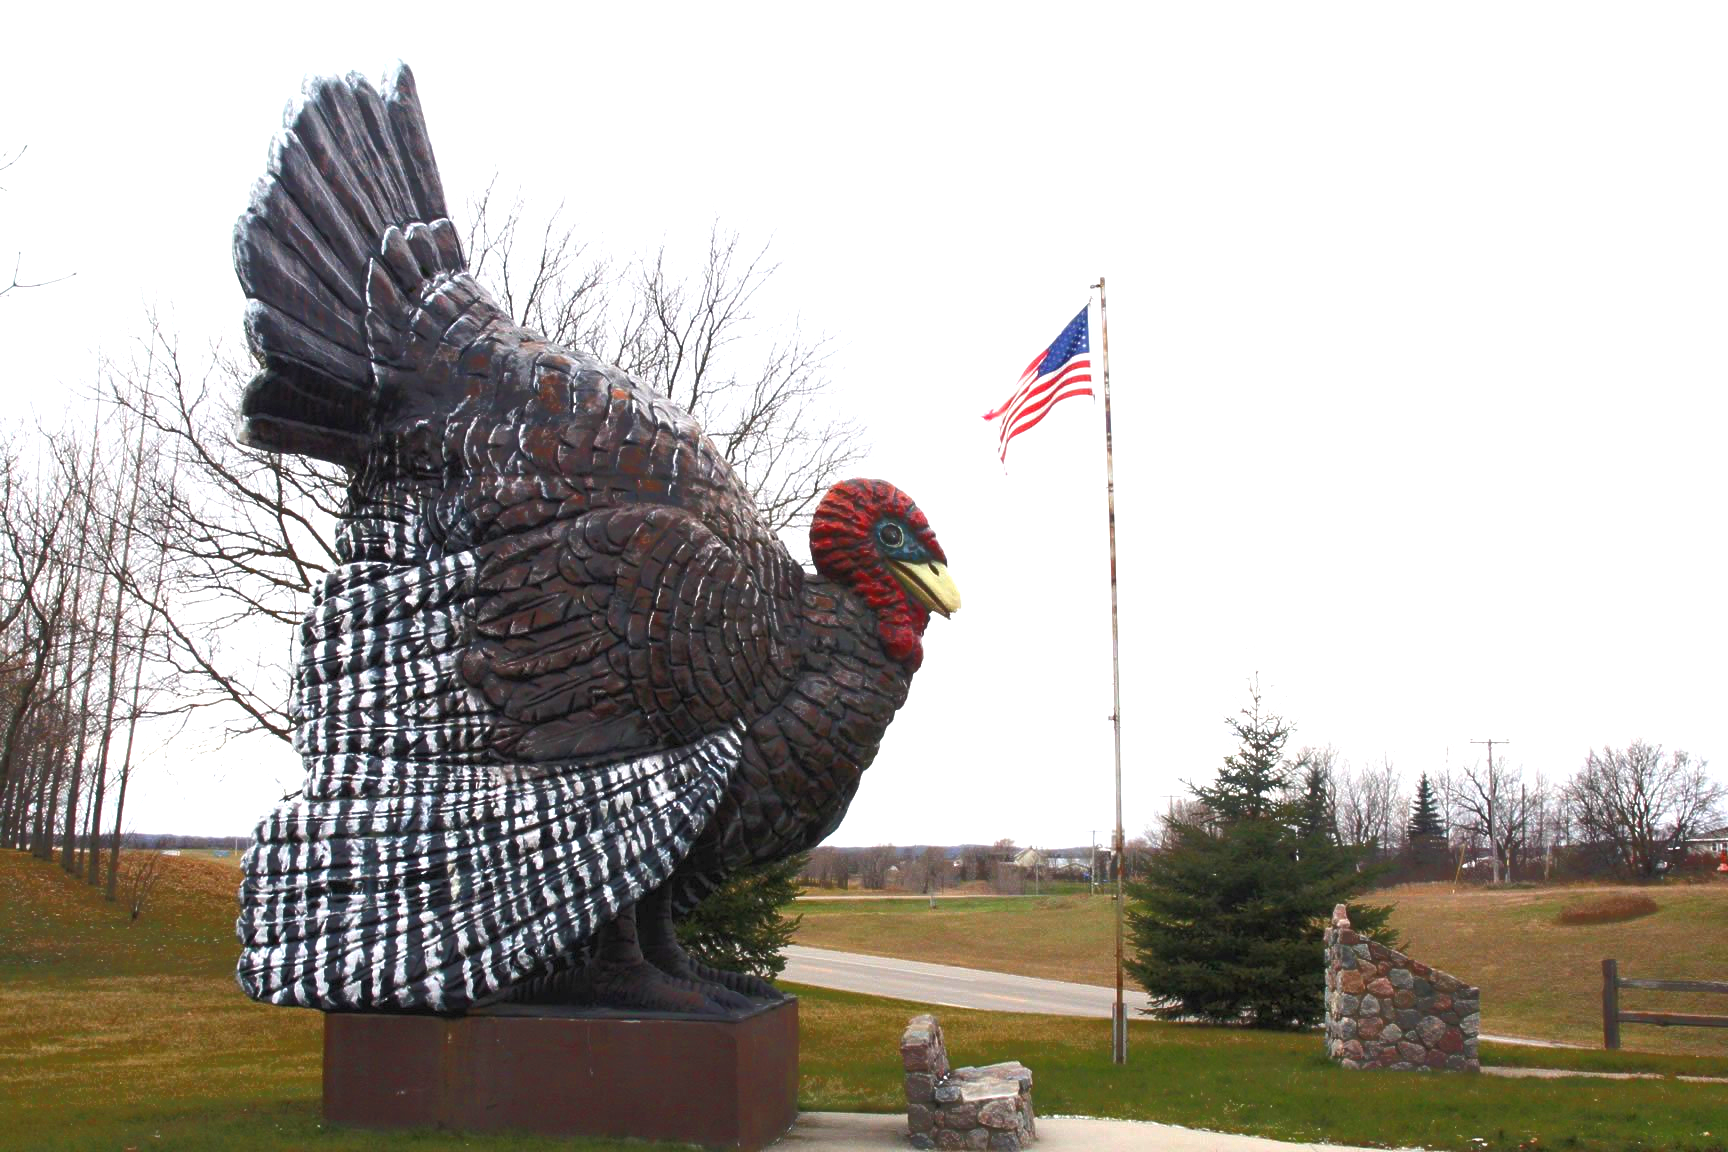 
Largest monument to the Turkey: Frazee's 'Big Tom' sets world record